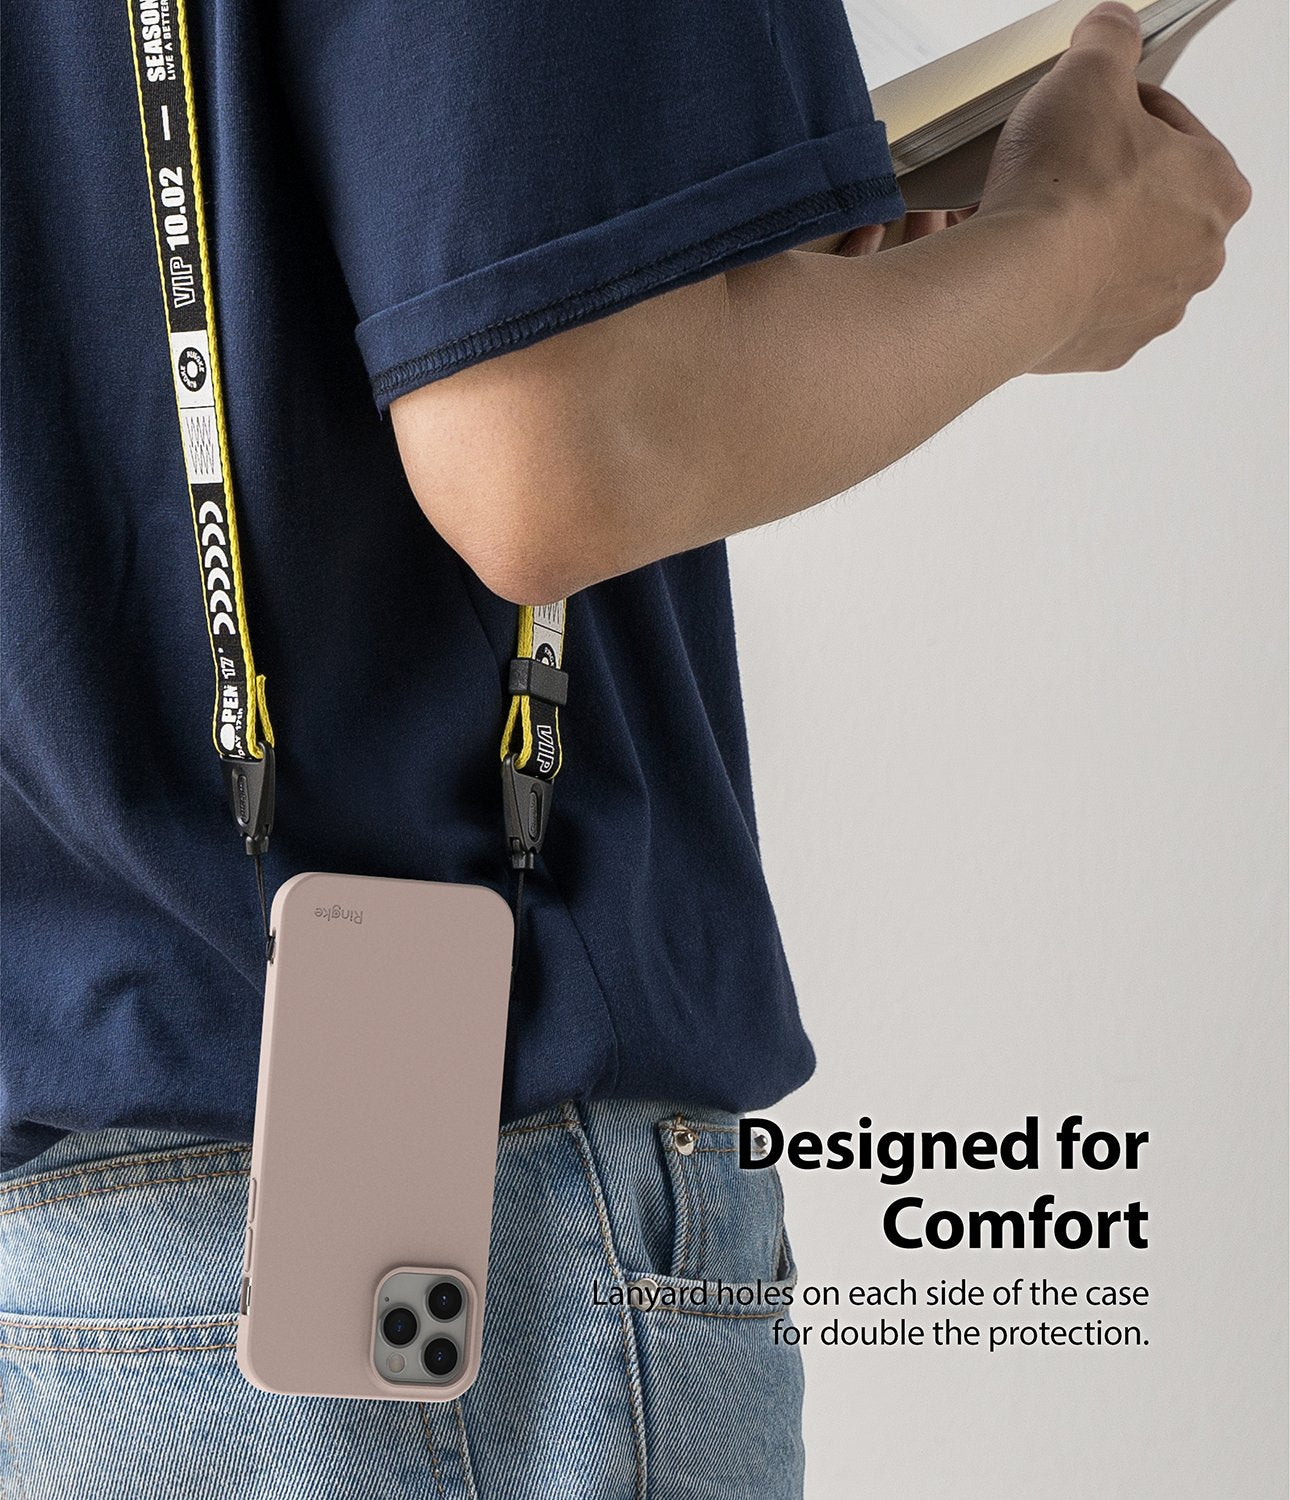 Ringke Air-S iPhone 12 / Pro / Pro Max Case Cover